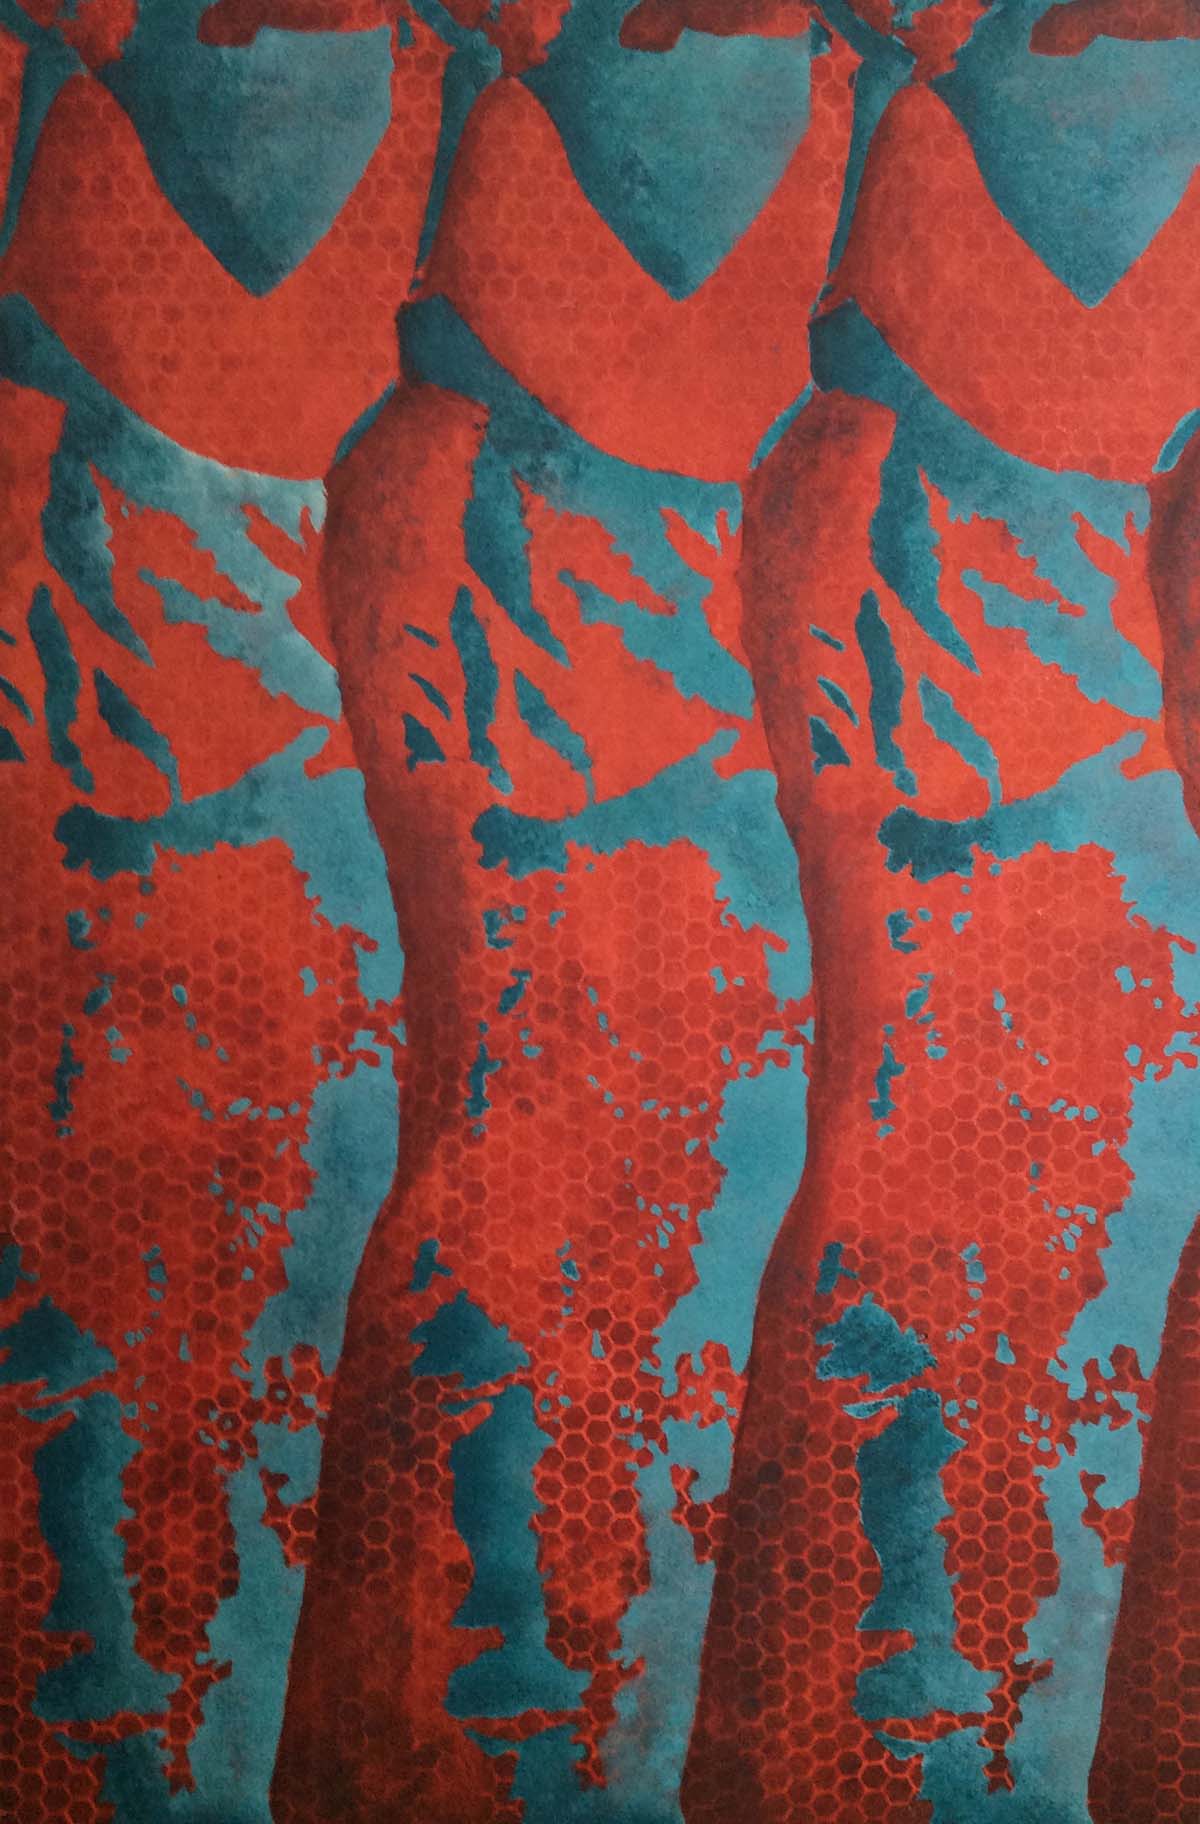 Figures in red and blue